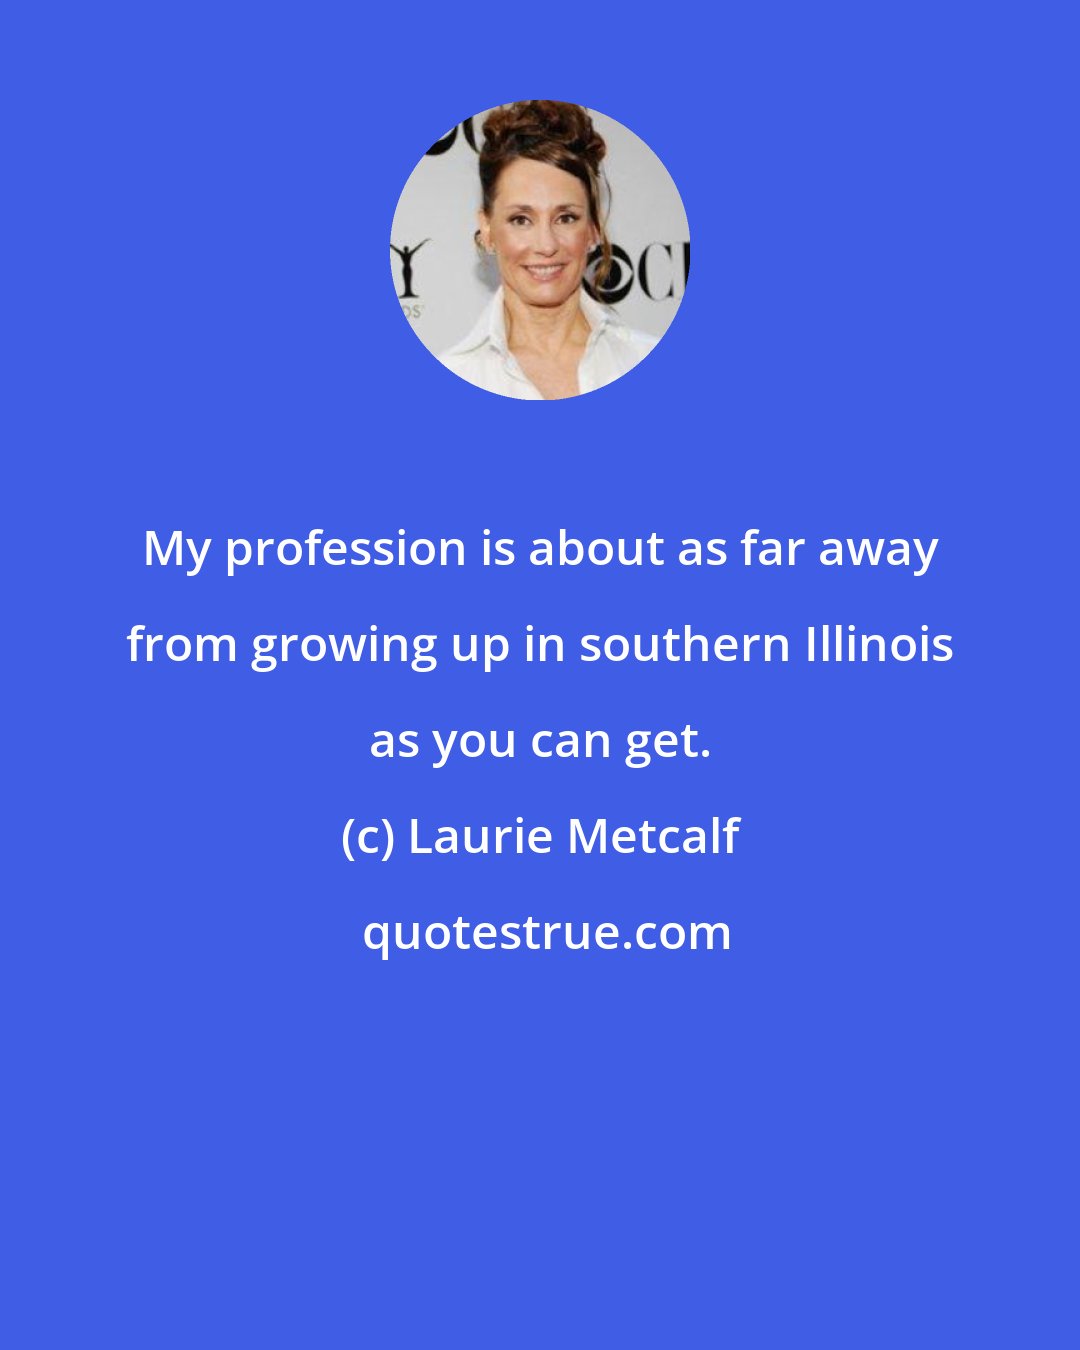 Laurie Metcalf: My profession is about as far away from growing up in southern Illinois as you can get.